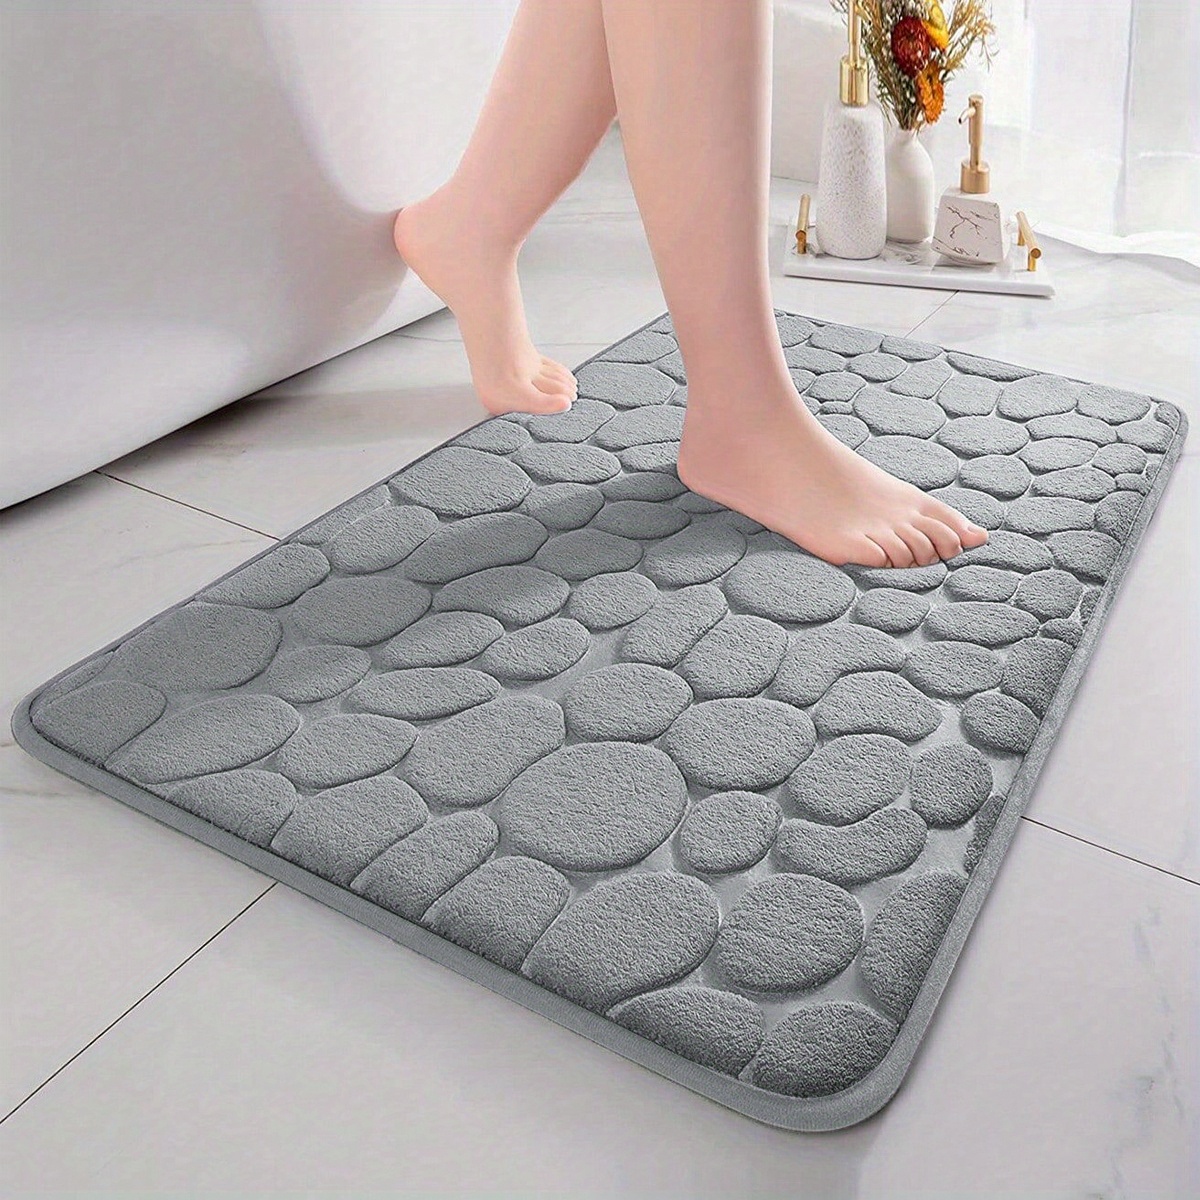 1pc Cobblestone Embossed Bathroom Bath Mat, Memory Foam Rapid Water  Absorbent Pad, Non-Slip Washable Thick Bath Rugs, Soft And Comfortable  Carpet For Shower Room, Bathroom Accessories & Decor , fall decor